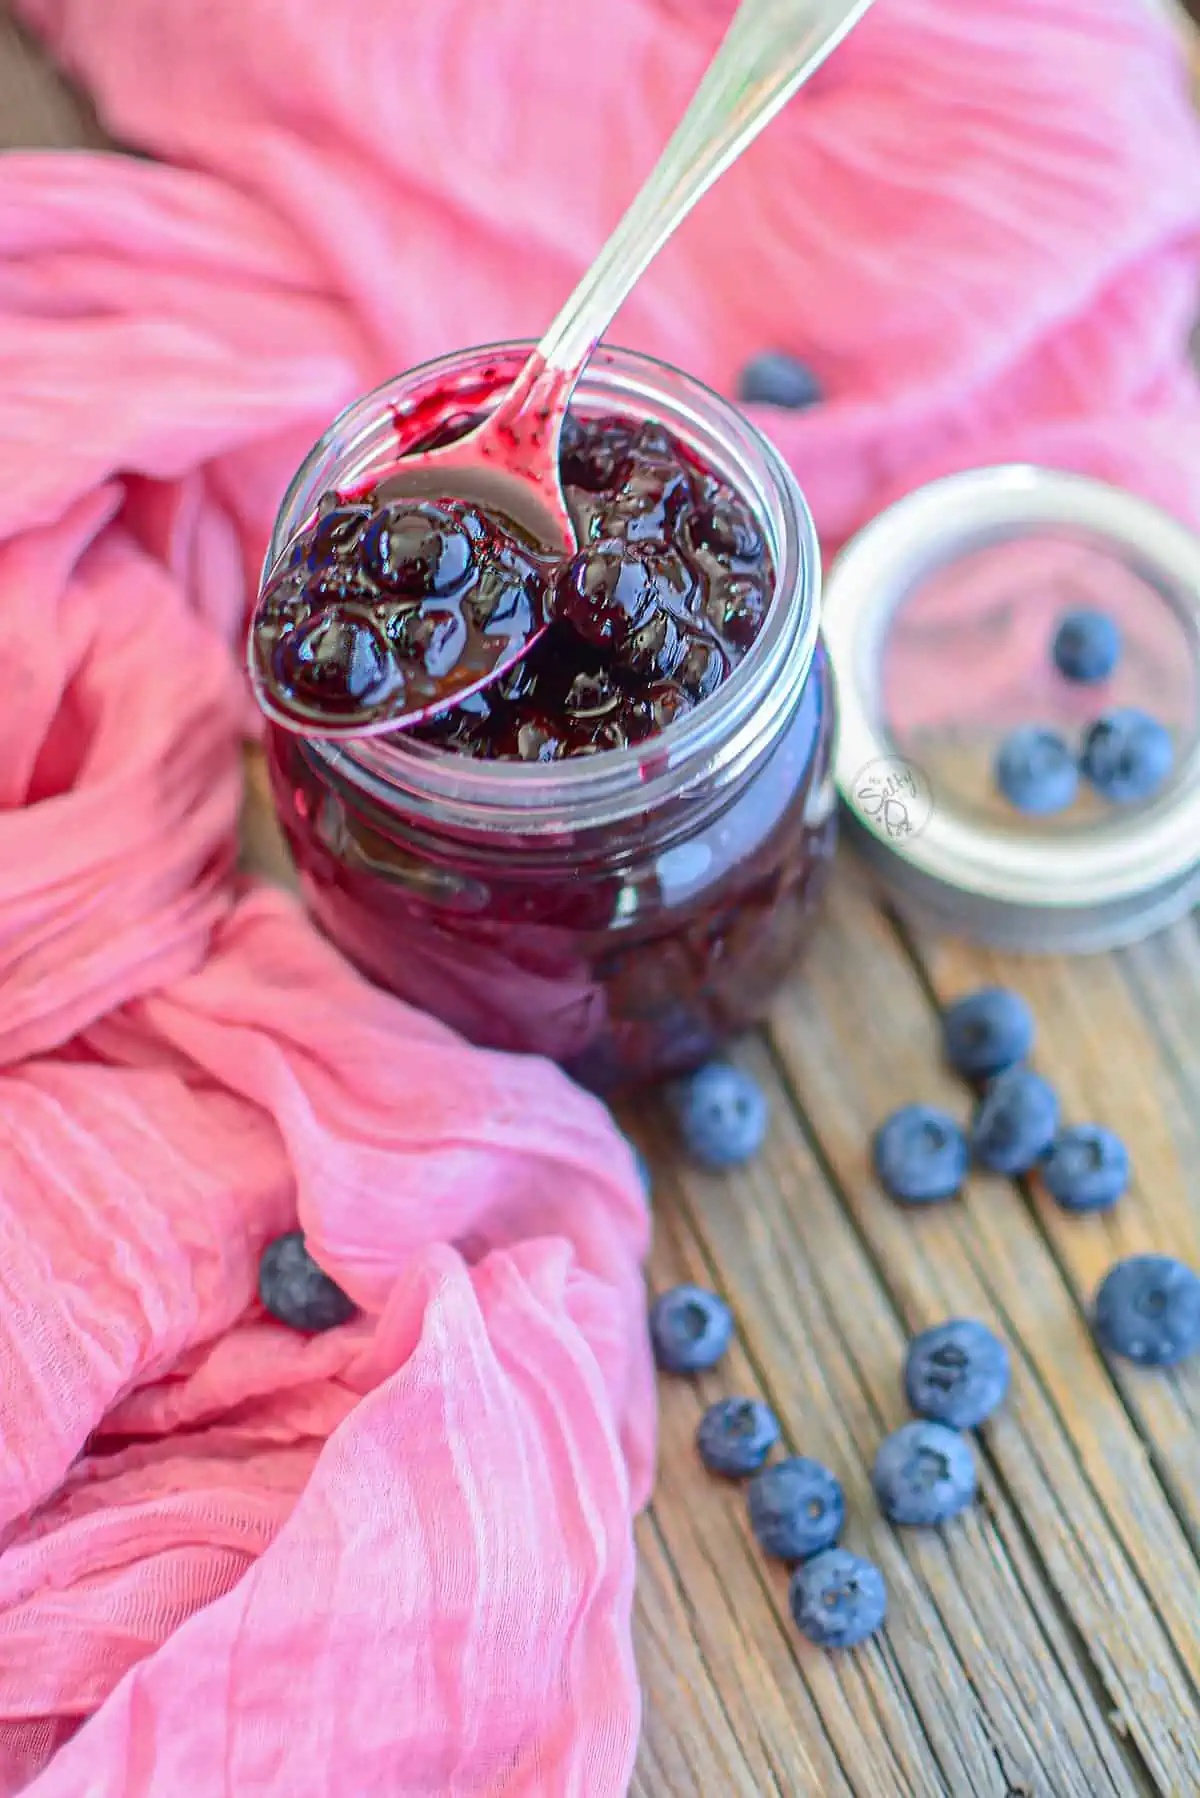 Berry pie filling with a spoon resting on the top of the jar on a wooden background.